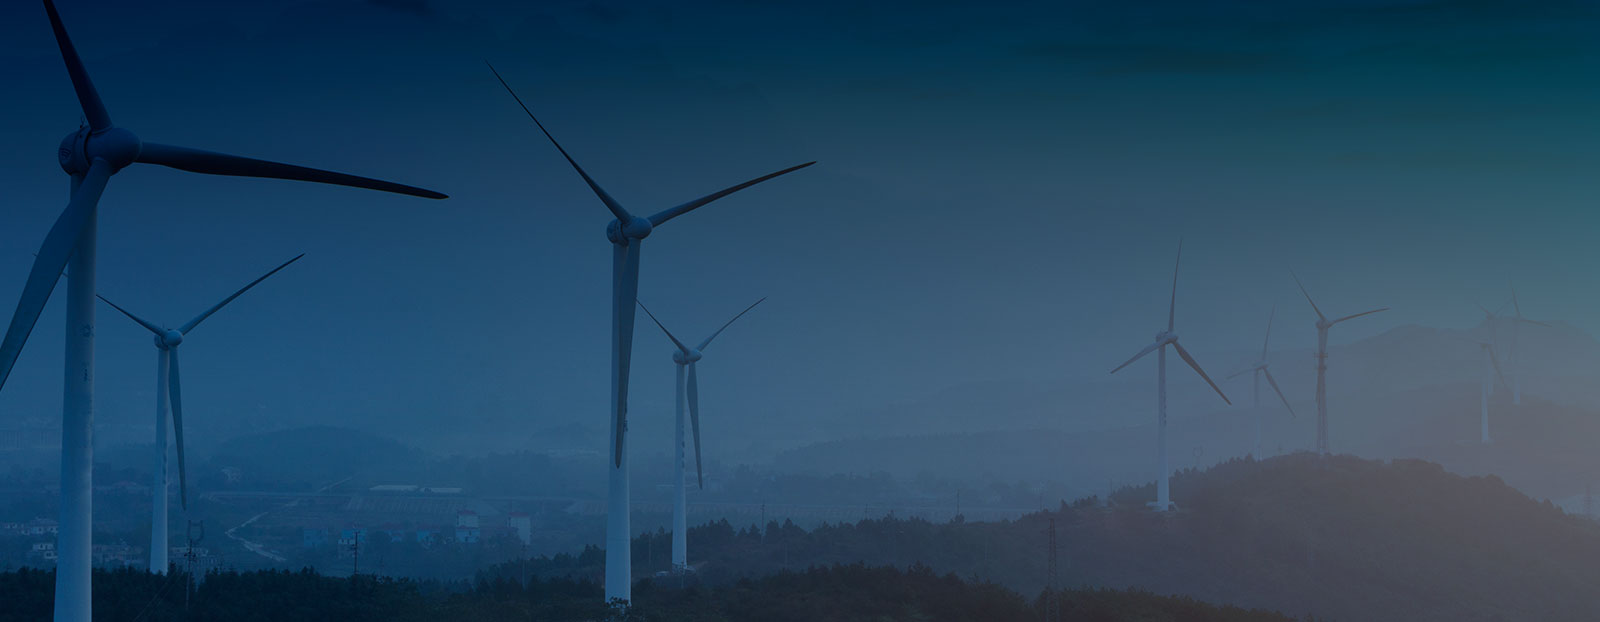 Transhield Wind Energy & Turbine Covers Solutions for the Energy Industry